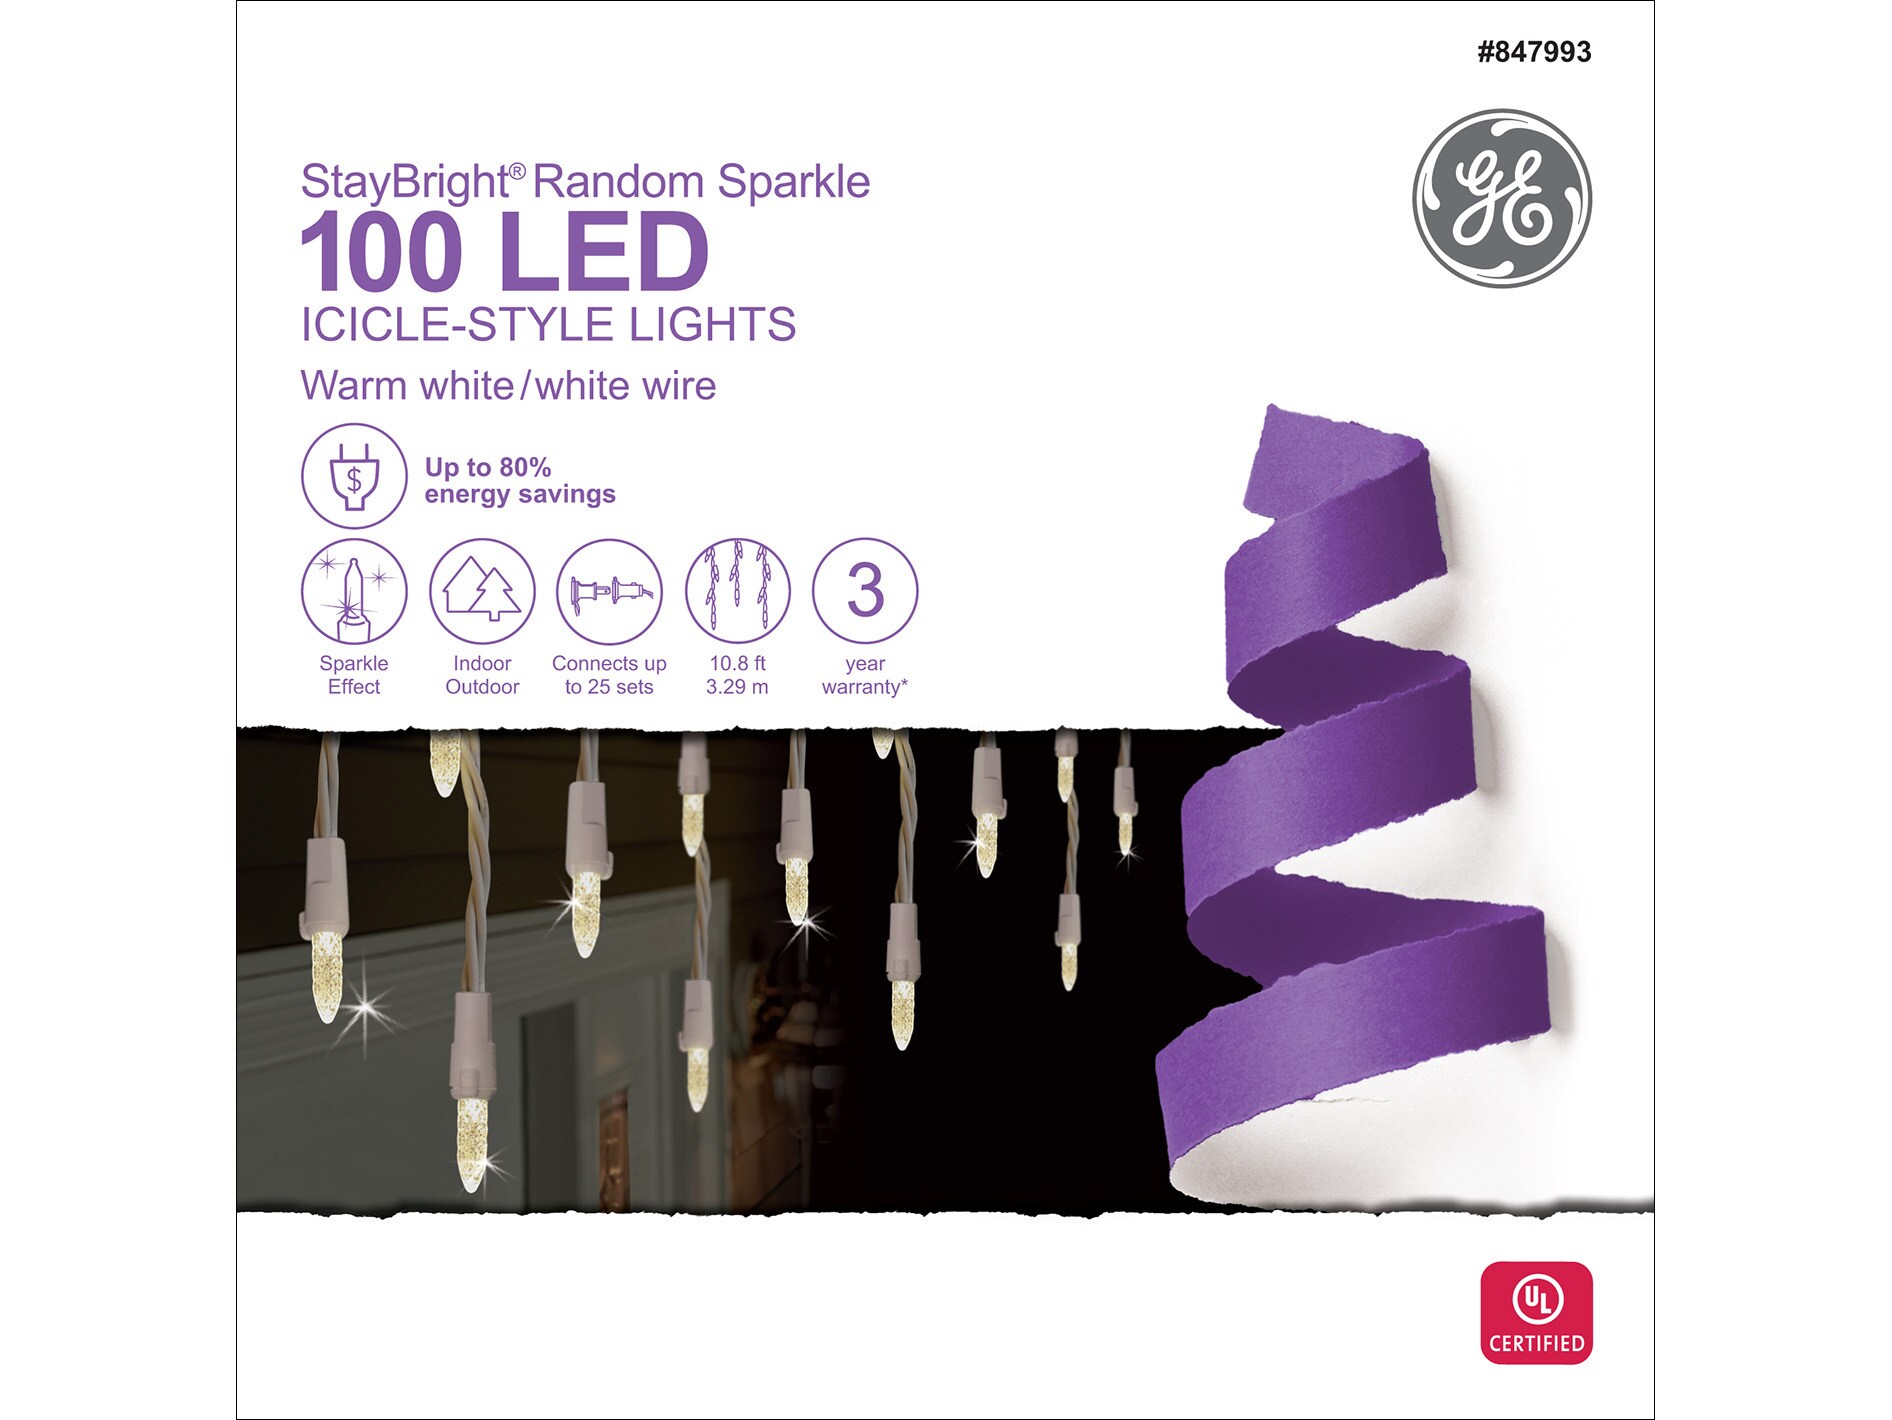 GE 100 Staybright LED Micro Icicle Style Lights NIB New 